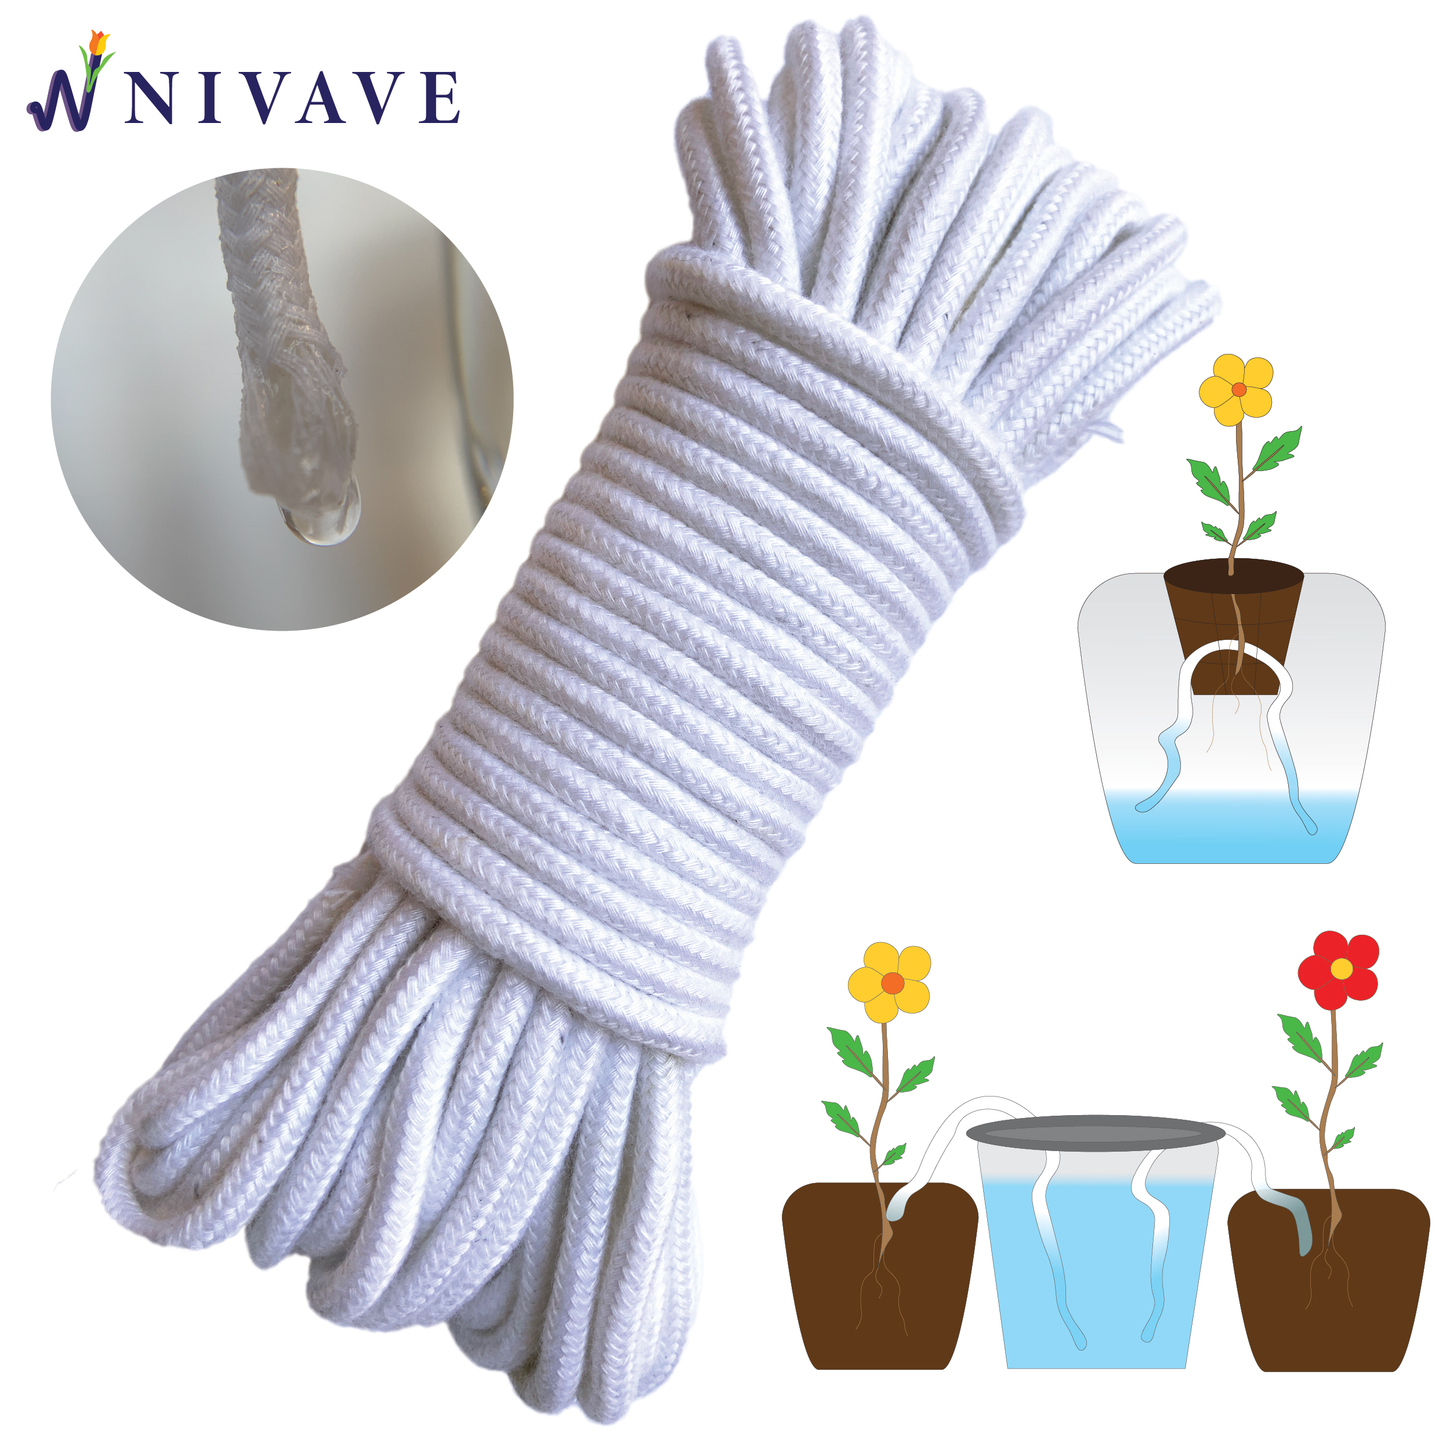 Nivave Self Watering Plant Wicking Cord